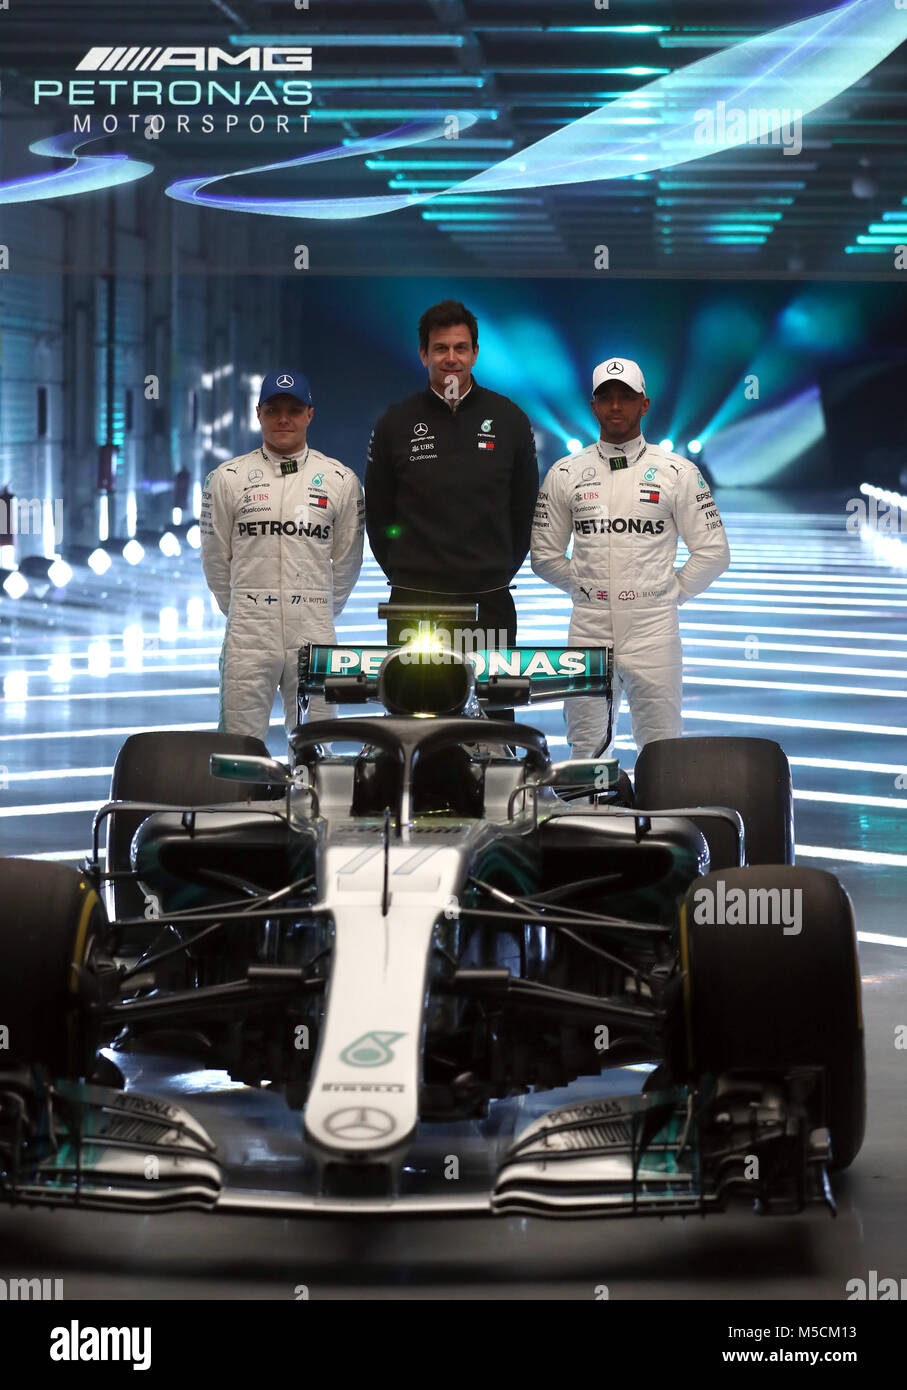 Mercedes Lewis Hamilton (right) and Valtteri Bottas (left) alongside team principal Toto Wolff as they pose for a picture with the new Mercedes W09 EQ Power+ during the Mercedes-AMG F1 2018 car launch at Silverstone, Towcester. Stock Photo